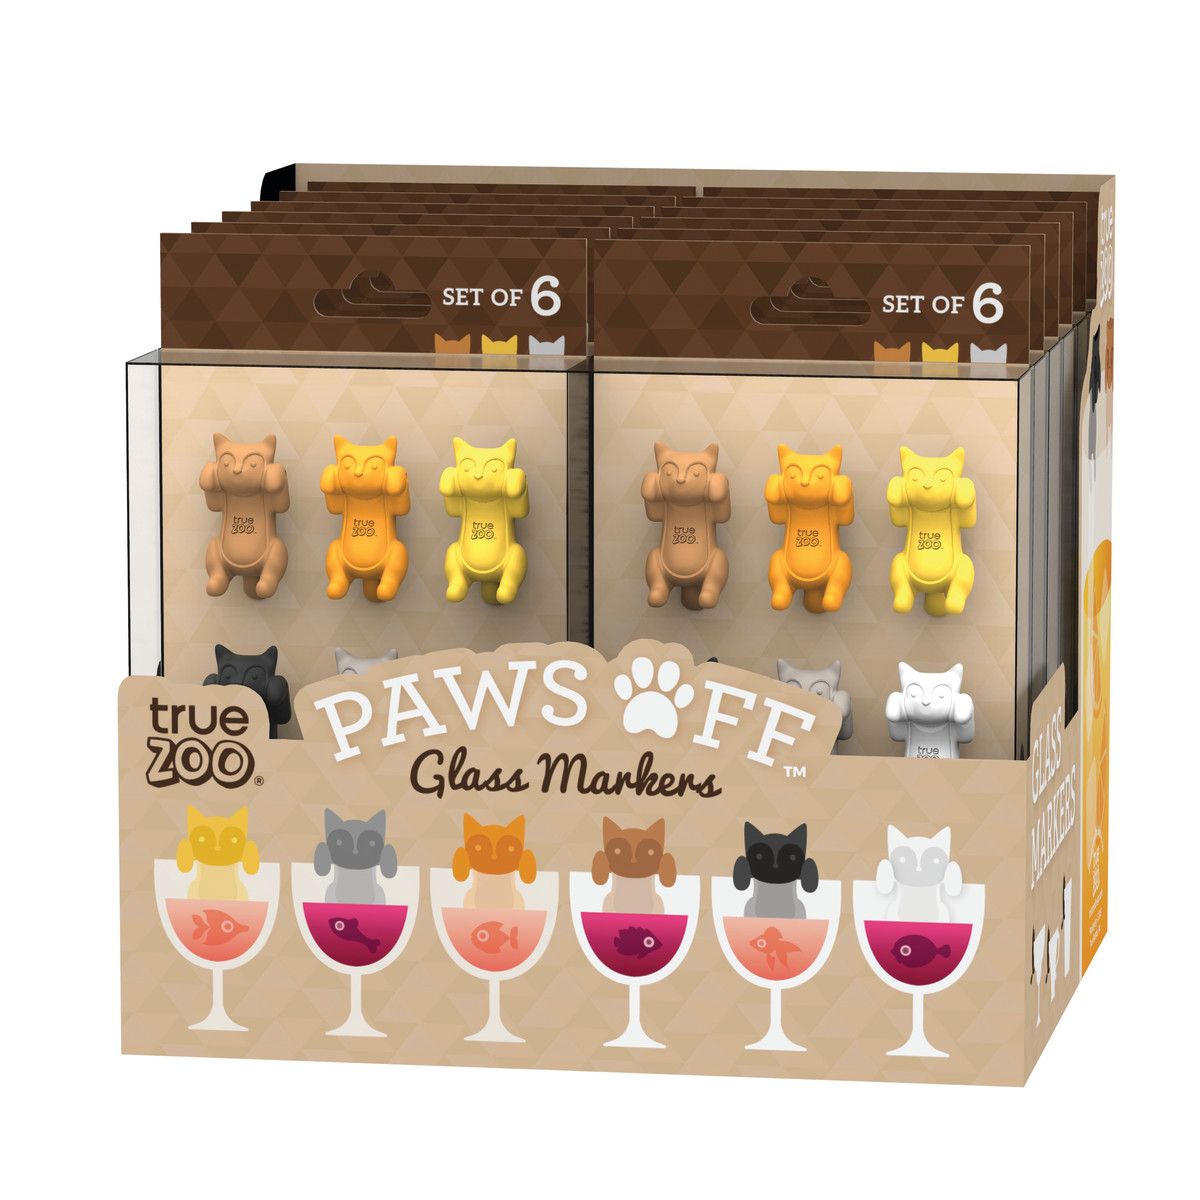 True Zoo Paws Off Glass Markers, Silicone Wine Charms, Cat Drink